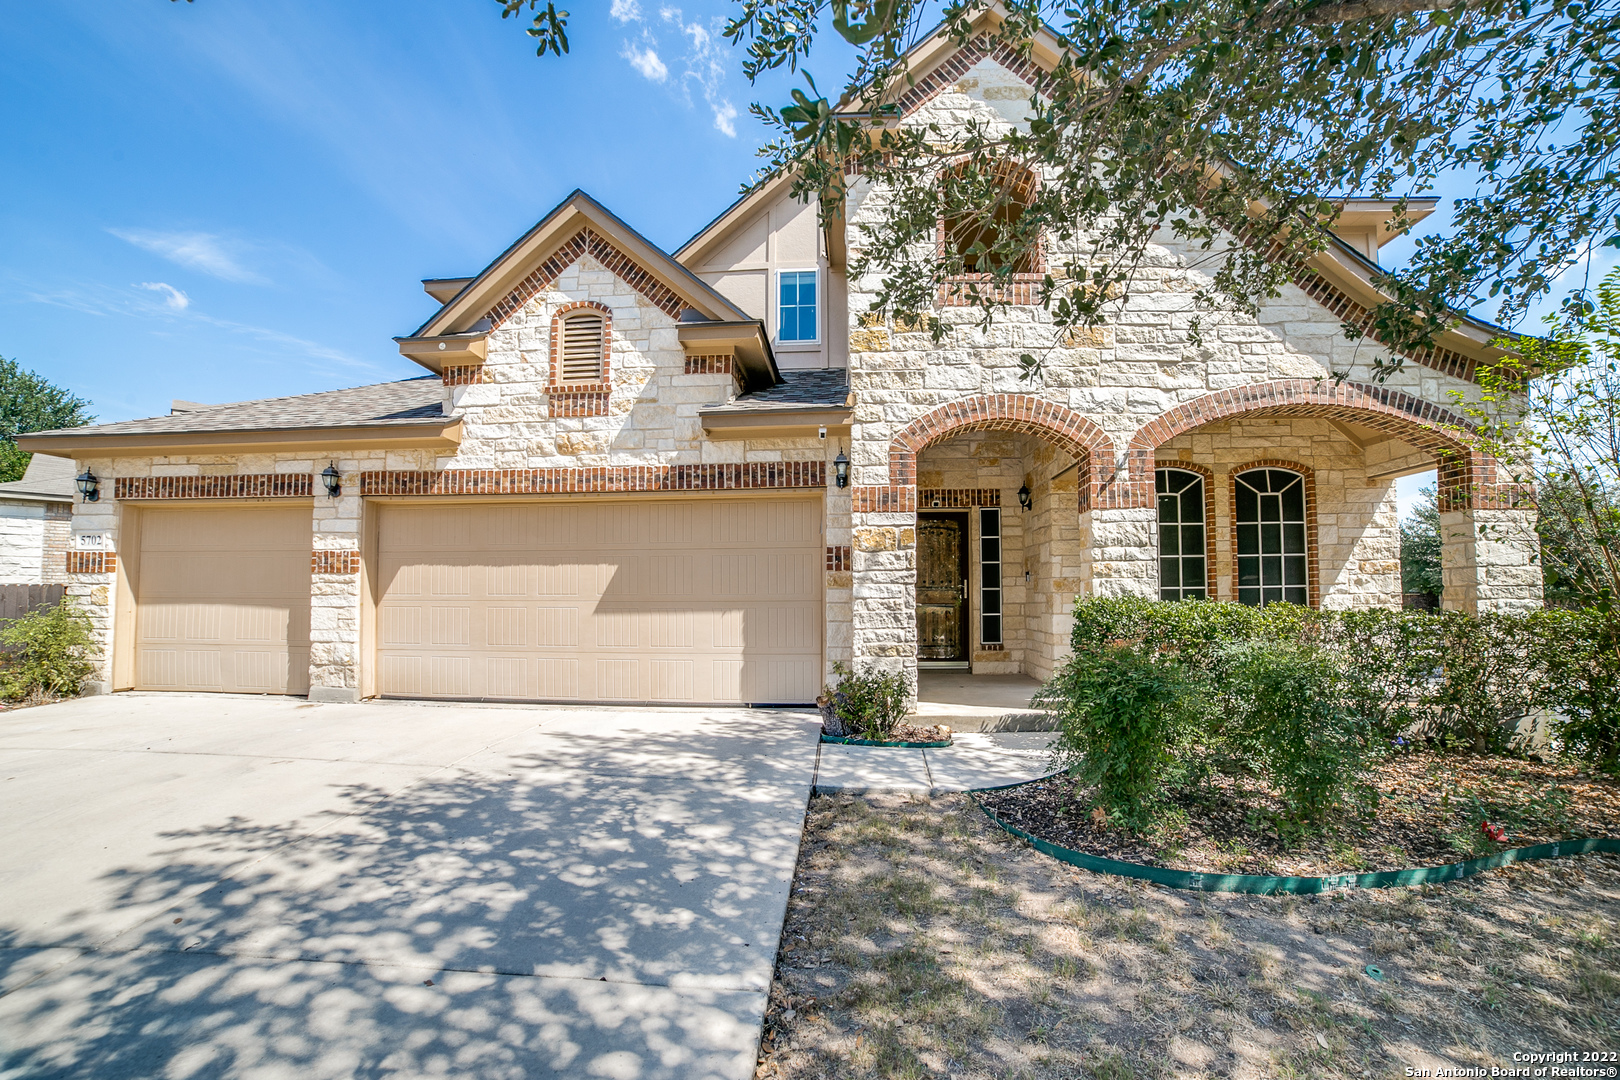 ****  OPEN HOUSE THIS WEEKEND SAT Nov 5th,  2:00-5:00pm  ****Welcome to The Terraces at Alamo Ranch!!! This HOME has it ALL!!  Beautiful 5 bedroom, 3.5 bath, 3-car garage nestled in the desirable Alamo Ranch sitting on a large corner lot.  This 2-story home, 3025 sq ft of living space features an open layout. The 1st floor offers an inviting entry way that opens to a study/office area, formal dining room perfect for all your holiday gatherings & master bedroom, dual vanities in master bath, features tiled shower and garden tub. The entry hall opens to a spacious living room that flows to breakfast area & kitchen. The kitchen offers a gas stove top, built-in oven, granite countertops, backsplash, large island, ALL appliances & so much more.  The 2-story ceiling in living room compliment open concept to the 2nd floor leading to the bedrooms/media & gameroom. This home has security cameras, water softener, window screens, sprinkler system, matured trees, fully landscape with large backyard great for entertainment and a covered patio. This home has easy access to major highways, NISD schools, close to shopping center, HEB, SeaWorld & Lackland AFB.  Contact me for a private home tour Today!